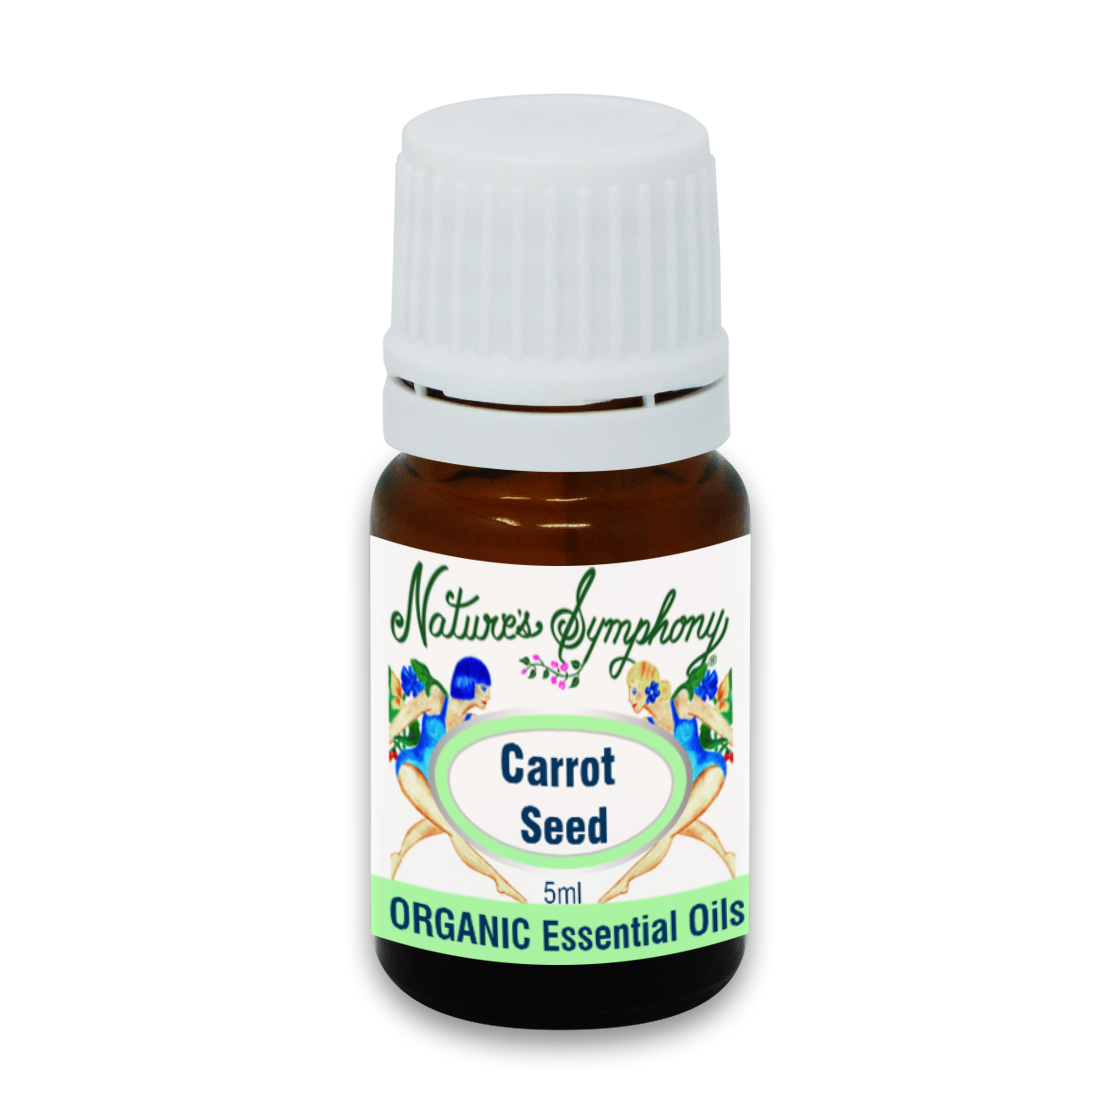 Carrot Seed, Organic/Wildcrafted oil - 5ml